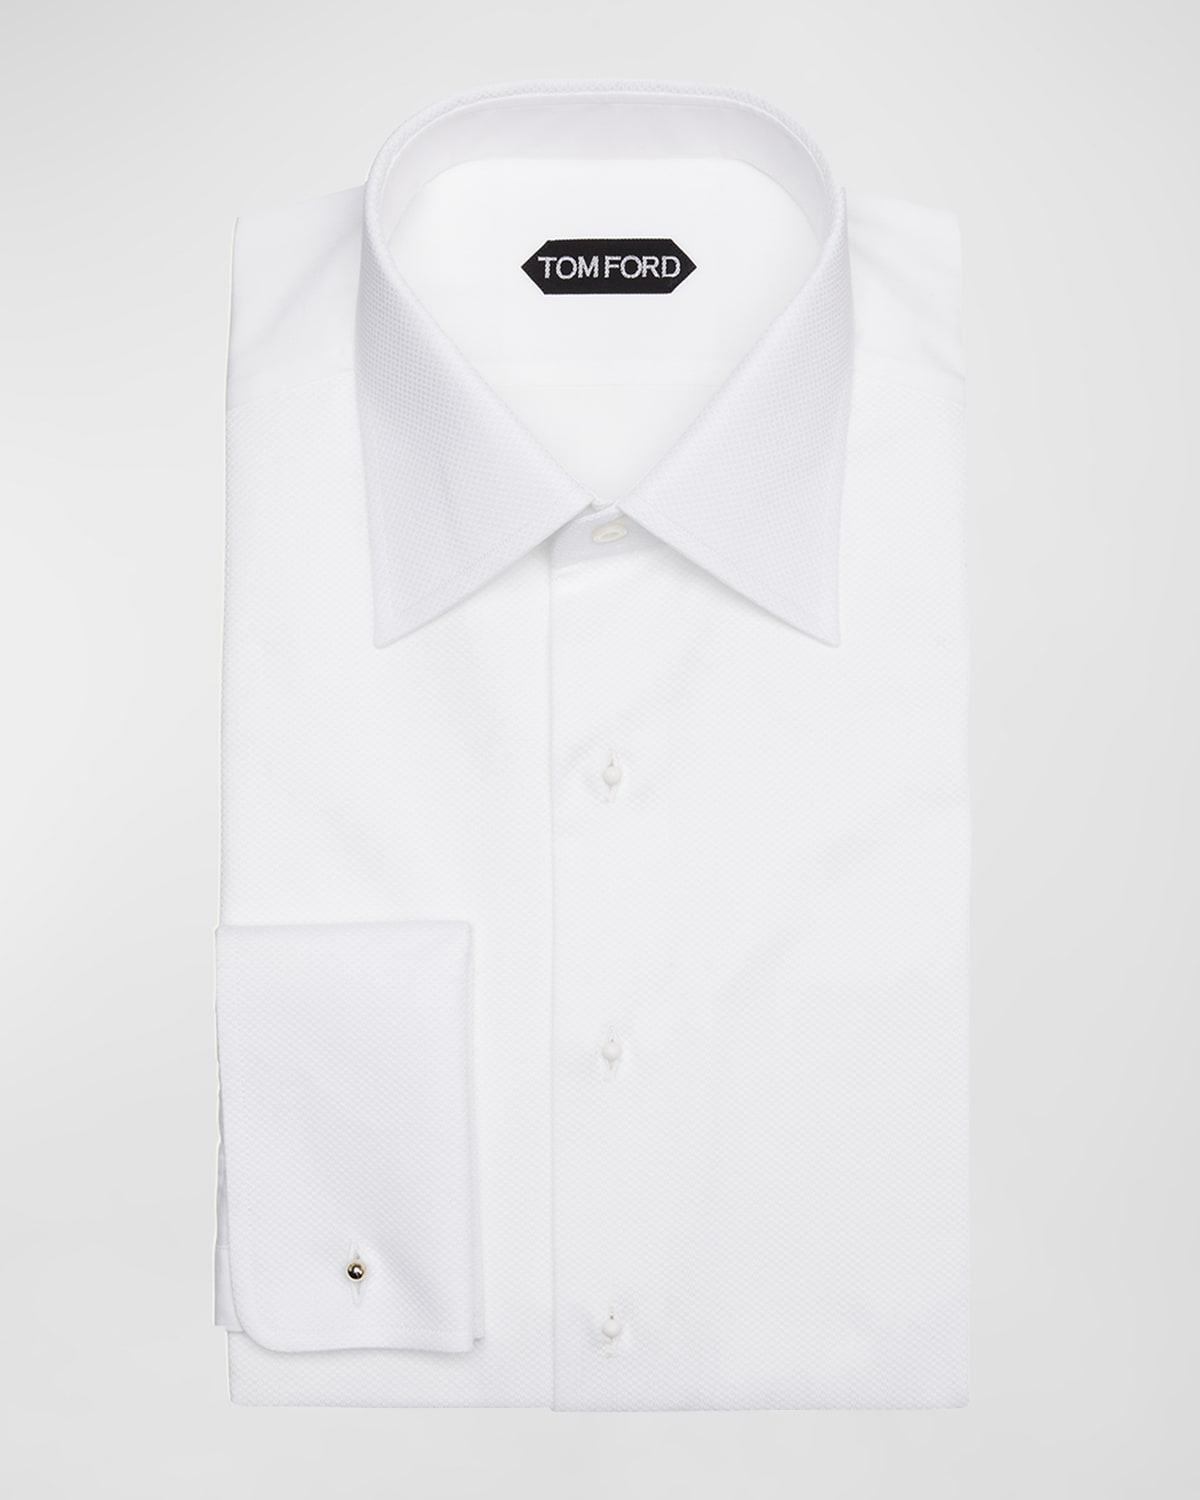 TOM FORD MEN'S COTTON PIQUÉ DRESS SHIRT WITH FRENCH CUFFS